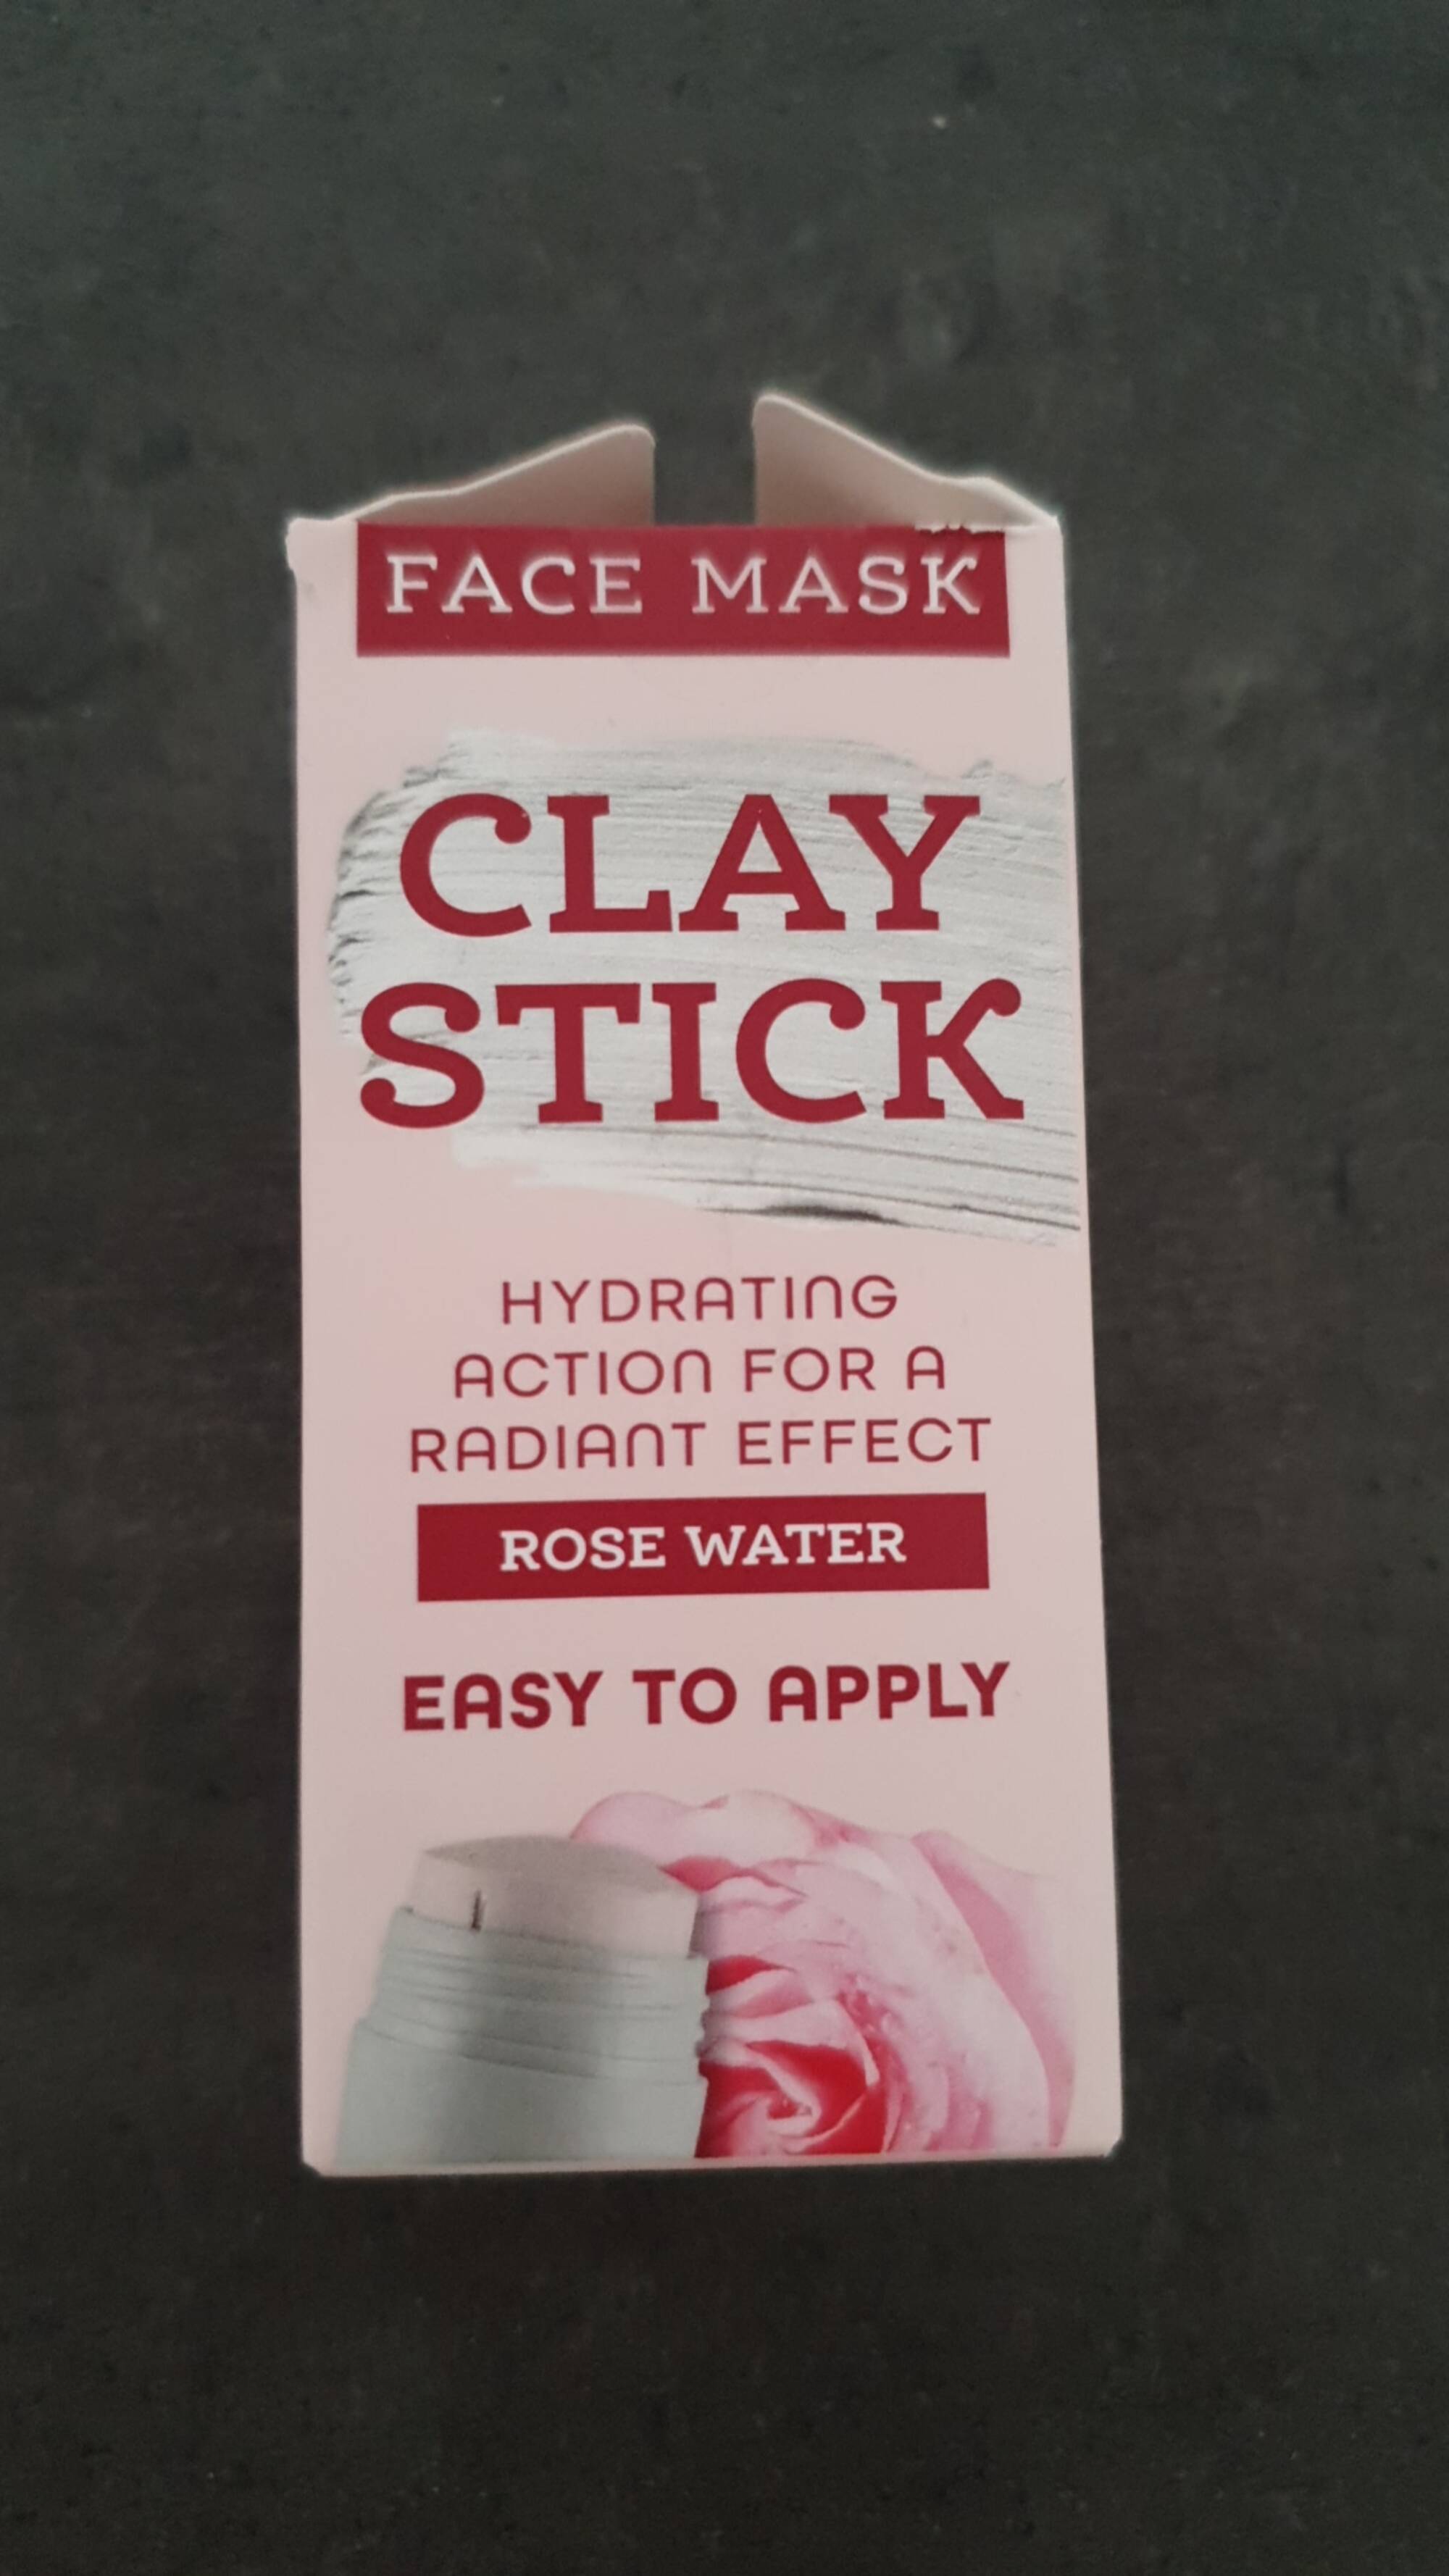 ACTION - Clay stick - Face mask rose water